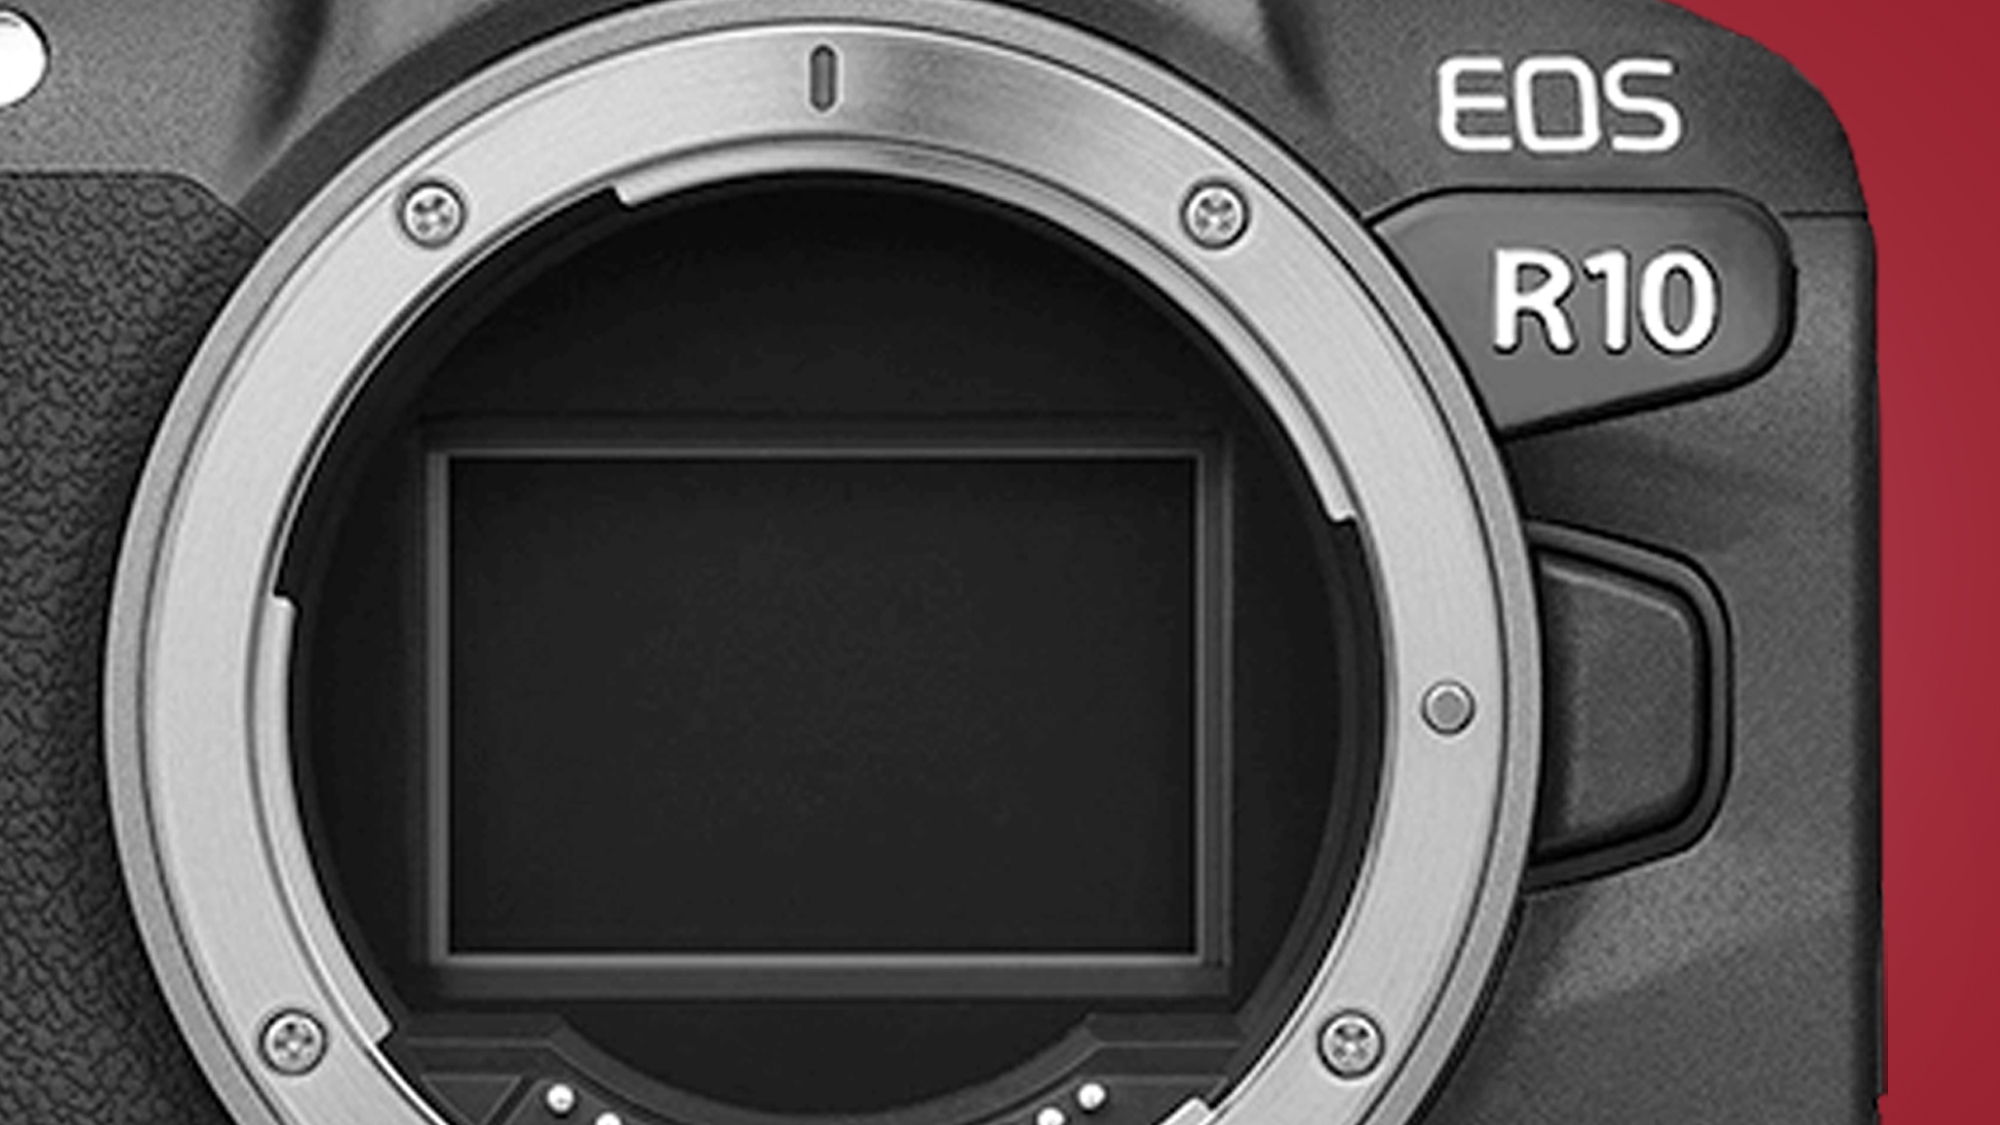 A simulated image of the rumored Canon EOS R10 camera